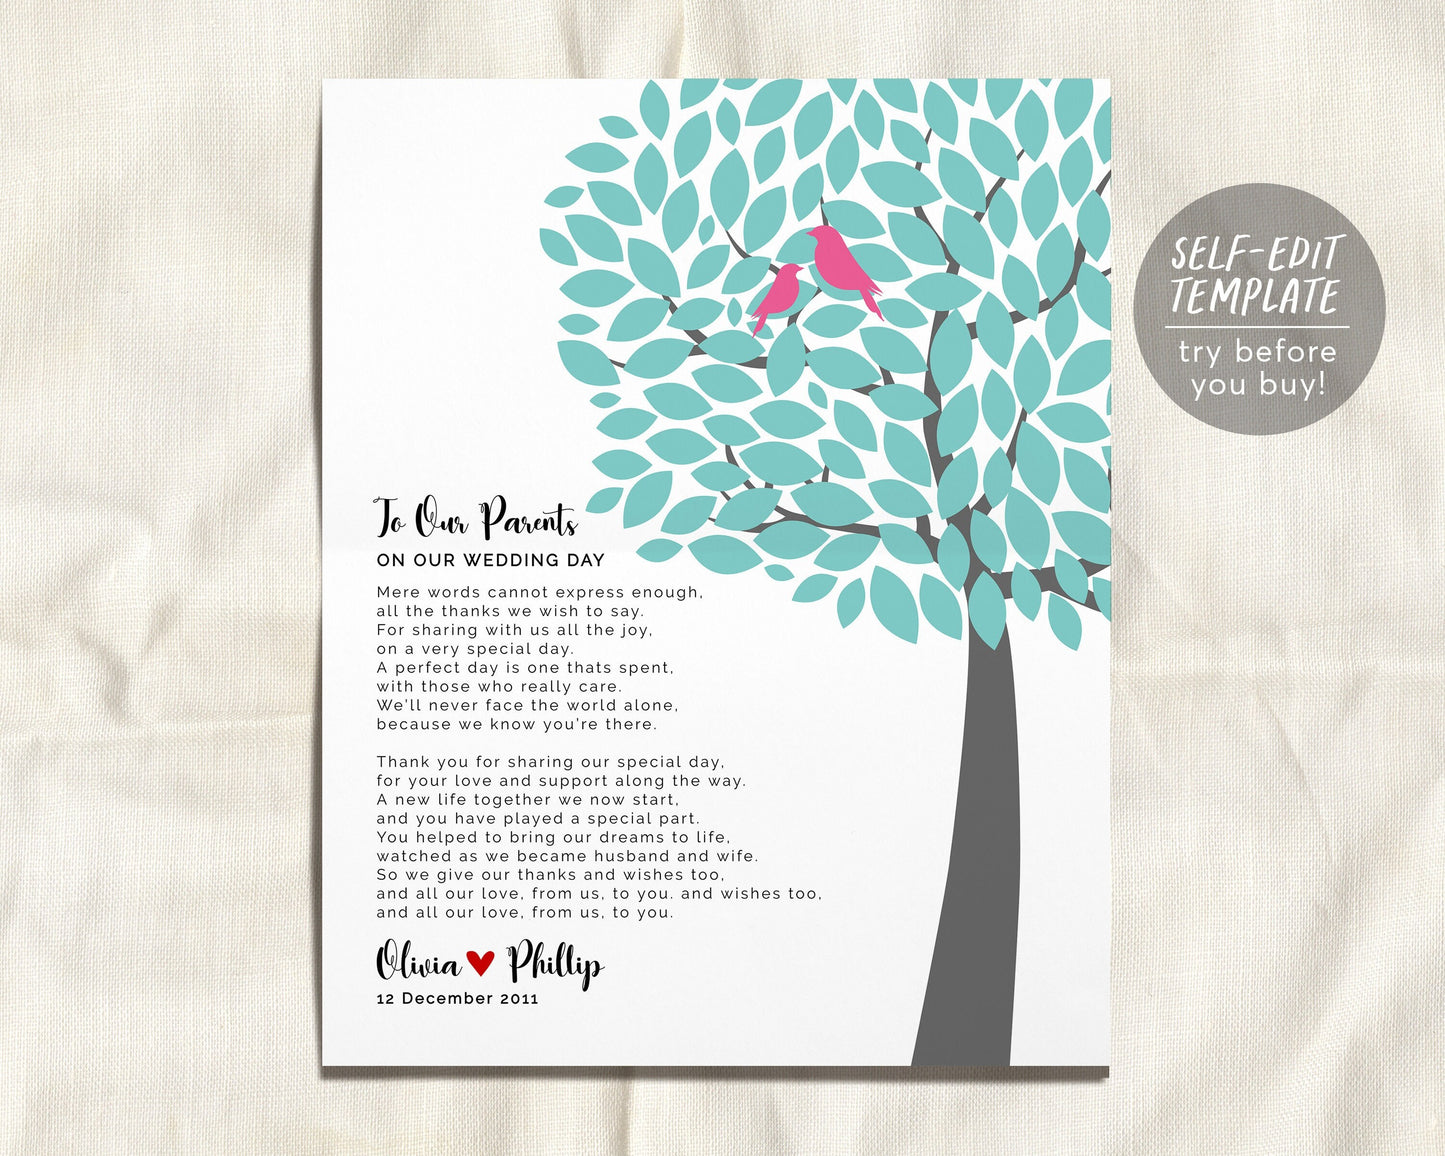 Editable Parents Wedding Gift Printable Template, Thank You Gift For Future In-Laws From Bride and Groom, Tree Wedding Keepsake